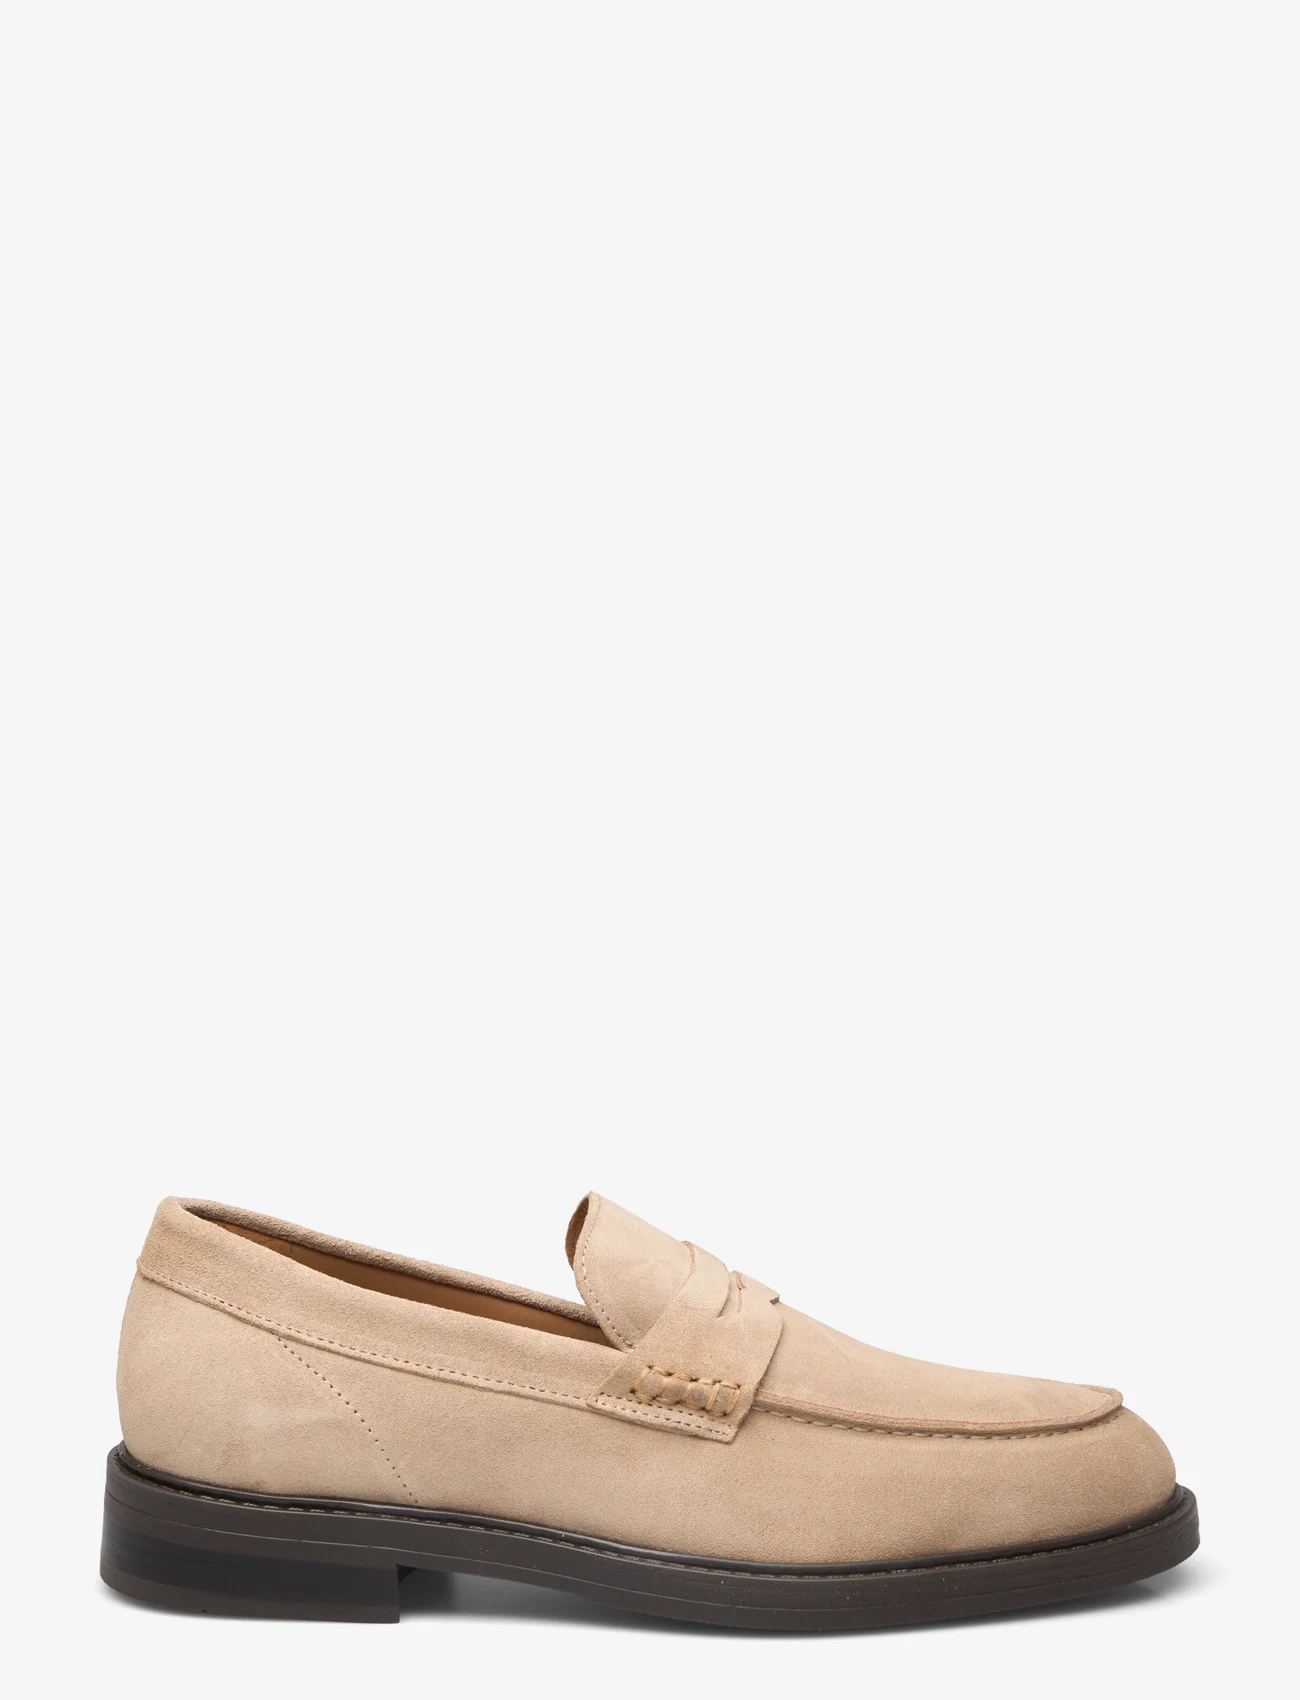 Selected Homme - SLHBLAKE SUEDE PENNY LOAFER - spring shoes - sand - 1